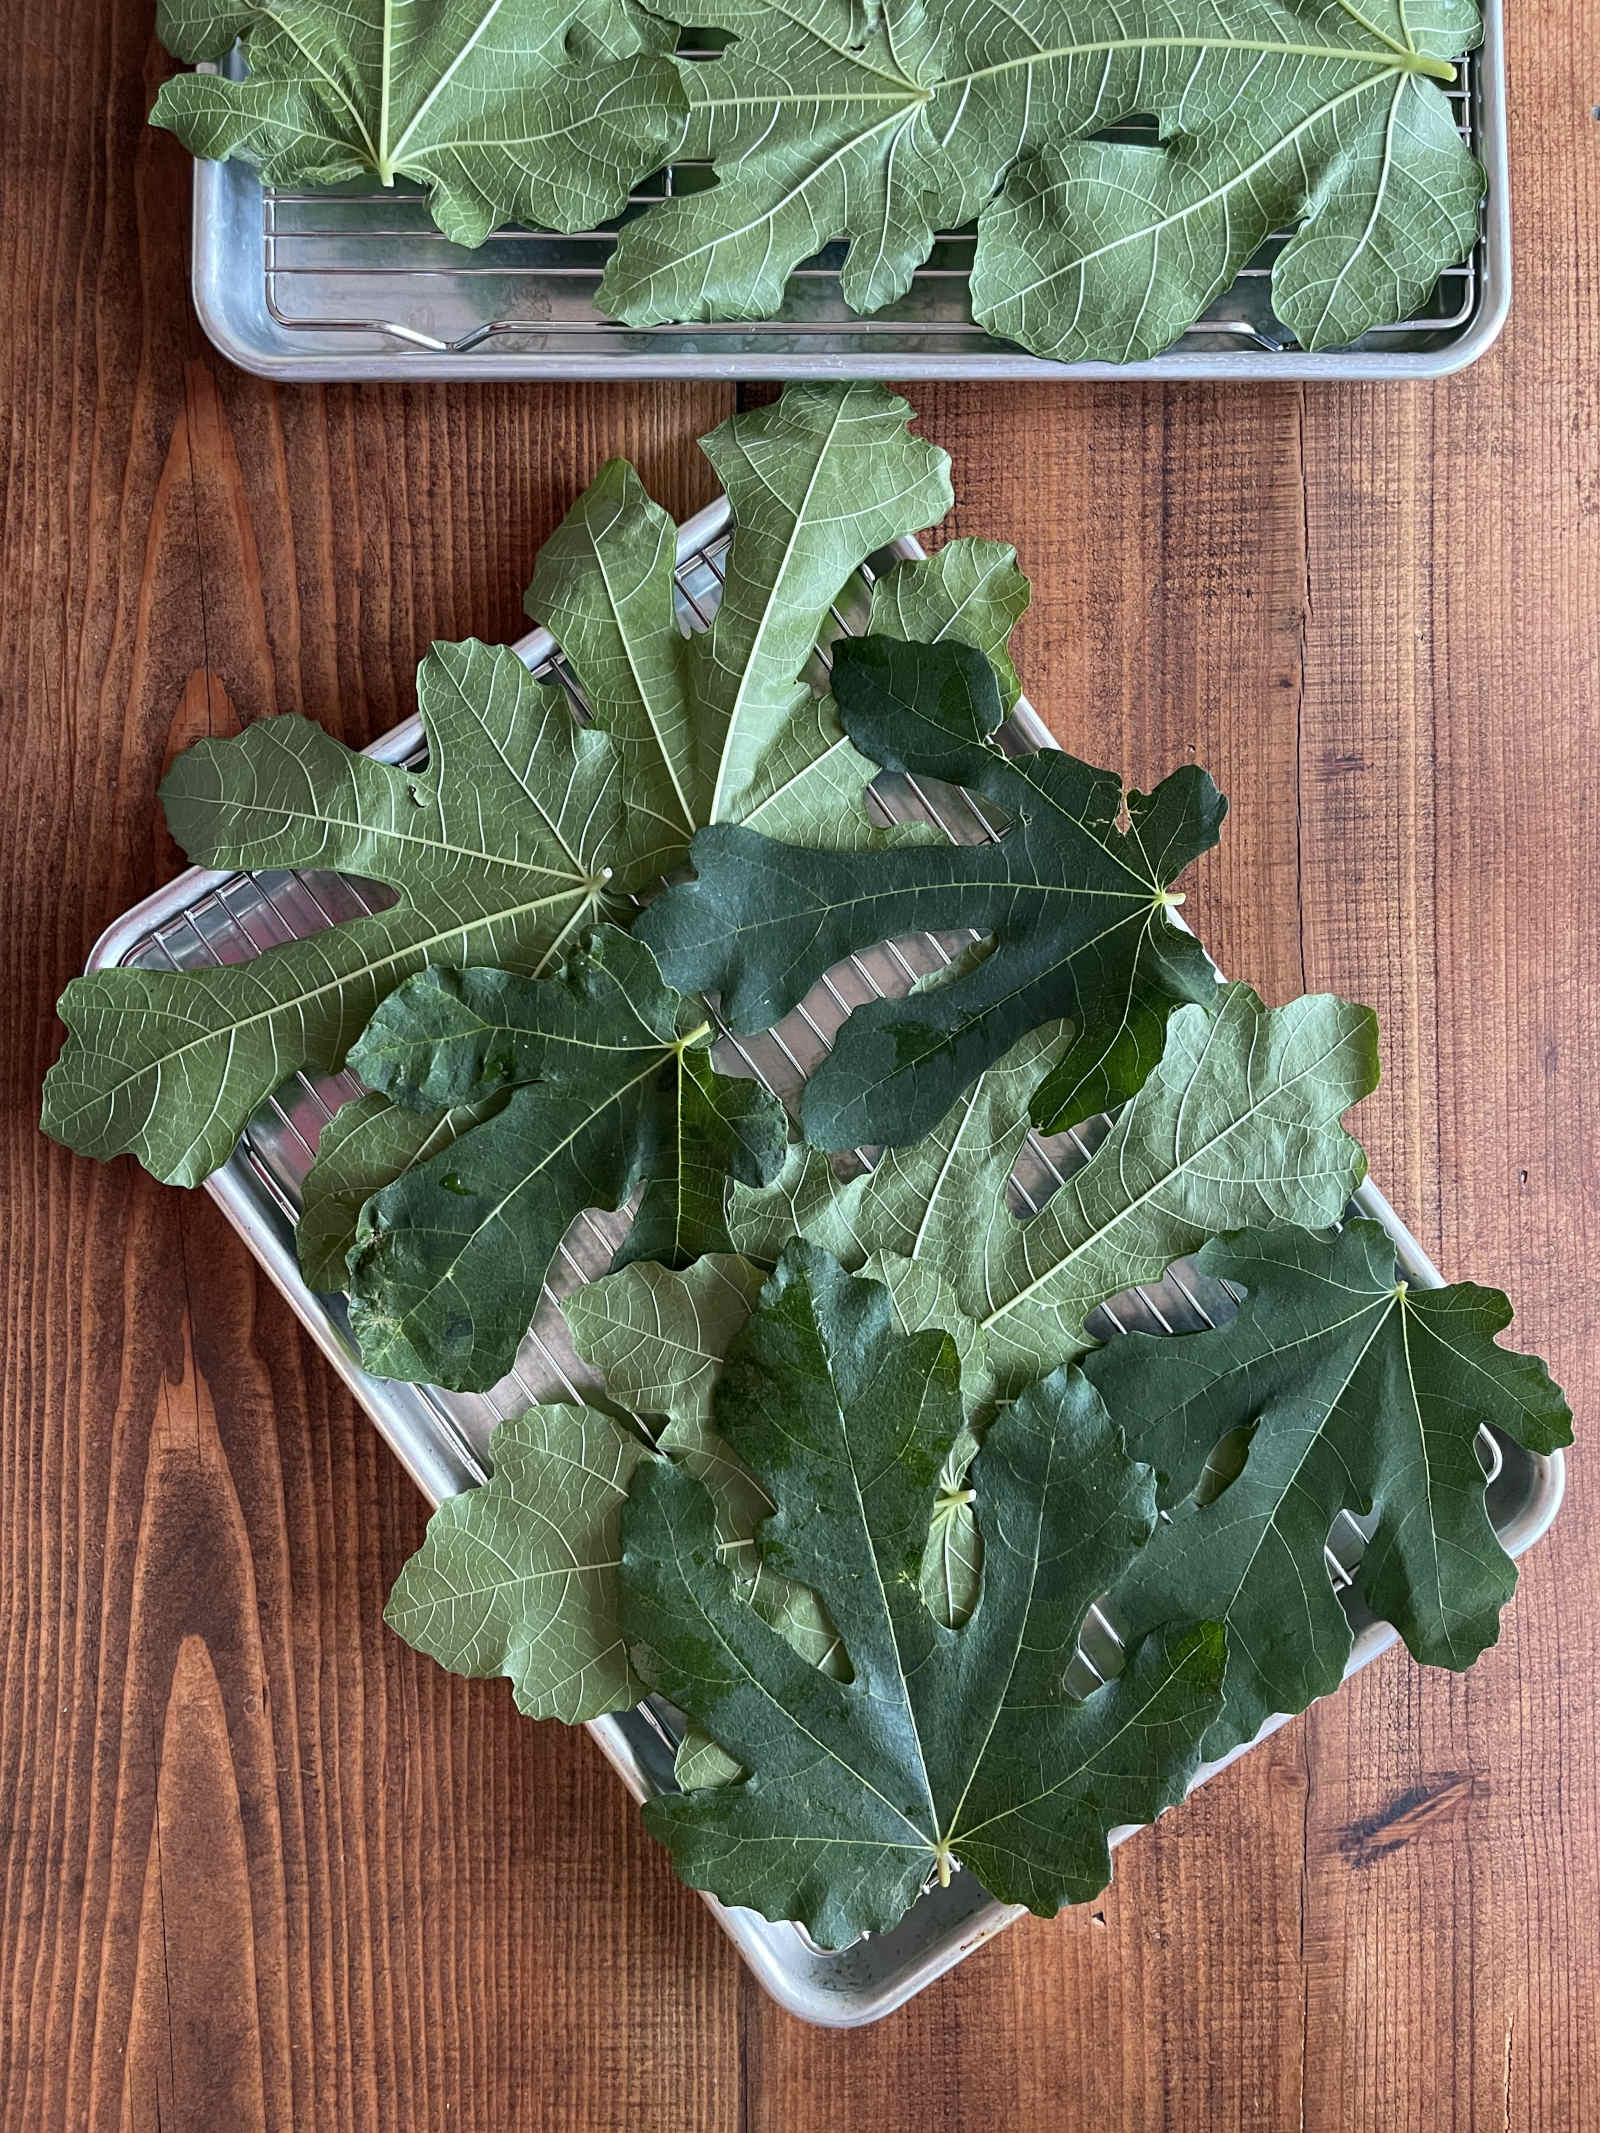 Many fig leaves are arranged on a cooling rack set inside baking sheets. The baking sheets are sitting on a dark wooden background.